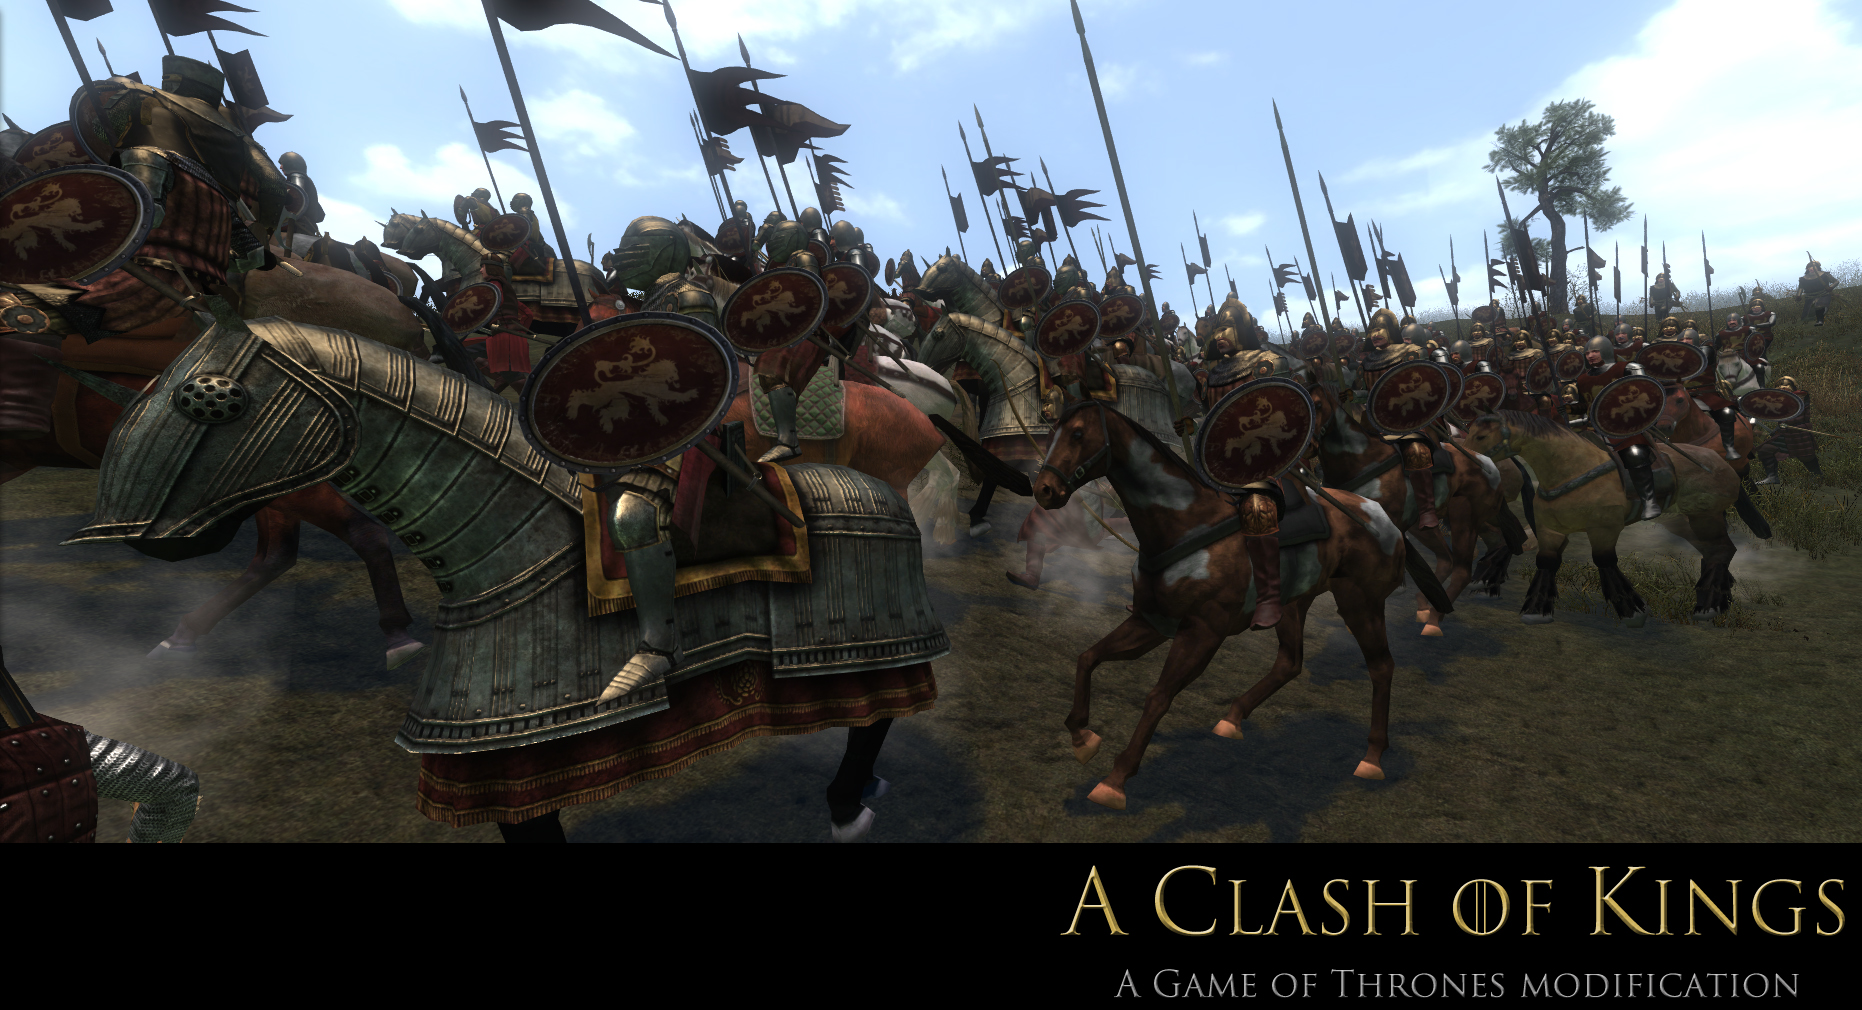 The Knights of the Mind  A Clash of Kings - A Mount and Blade